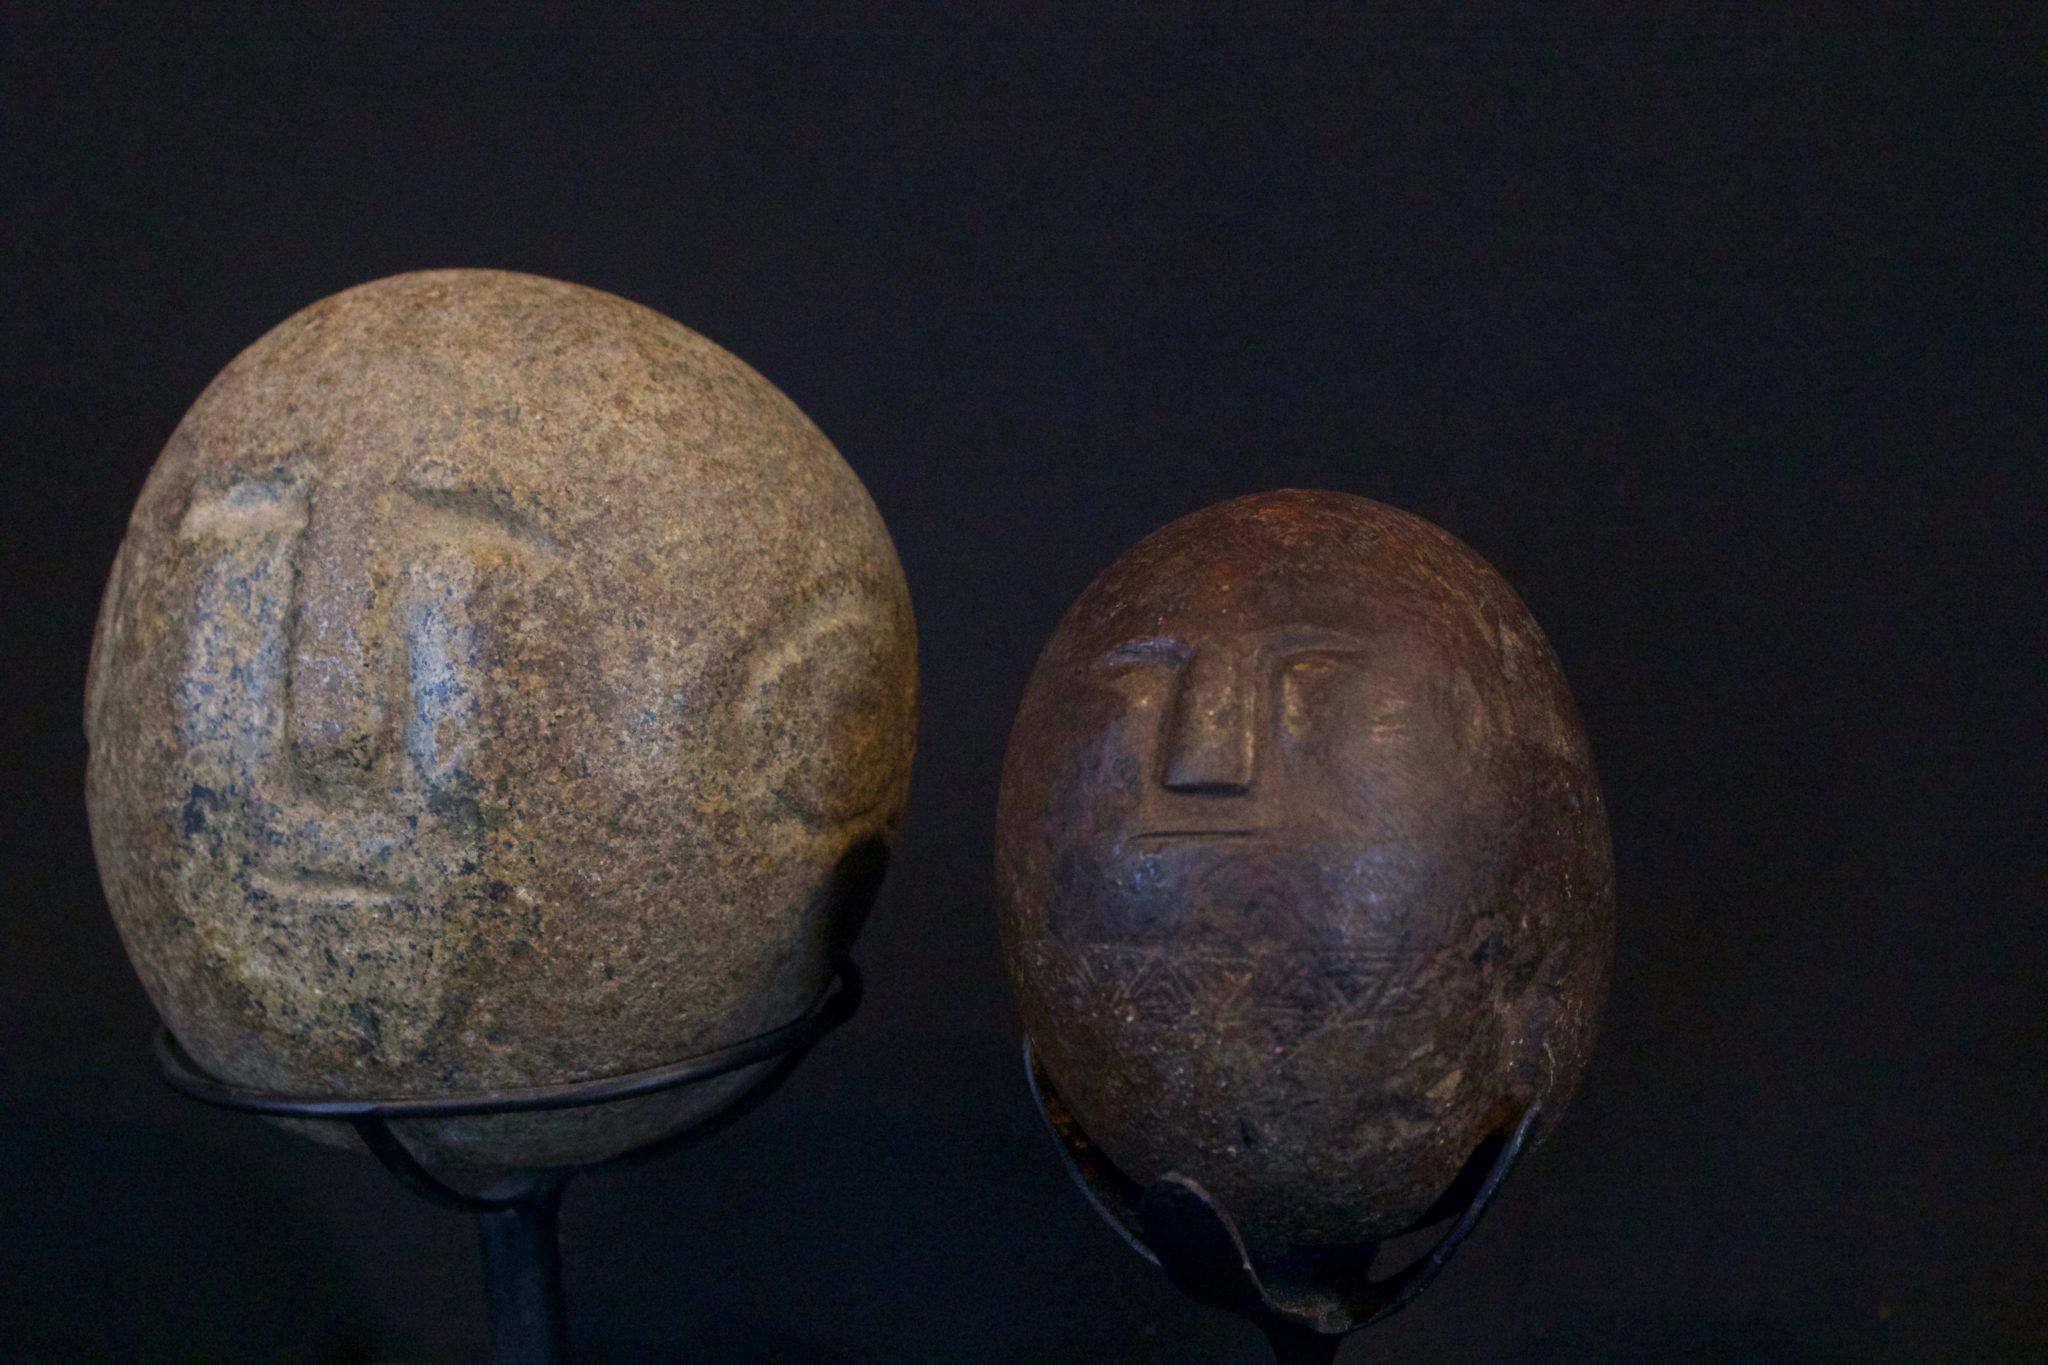 Healing Figures, Timor Island, Lesser Sunda Islands, Indonesia, Mid to late 19th c. Stone, patinated with use and age. Used in healing rituals. (left - late 19th c, 3 ¾” x 2 ¾” x 3 ¼”, sold); (right - mid 19th c, 3 ¾” x 2 ¾” x 3 ¼”, sold)